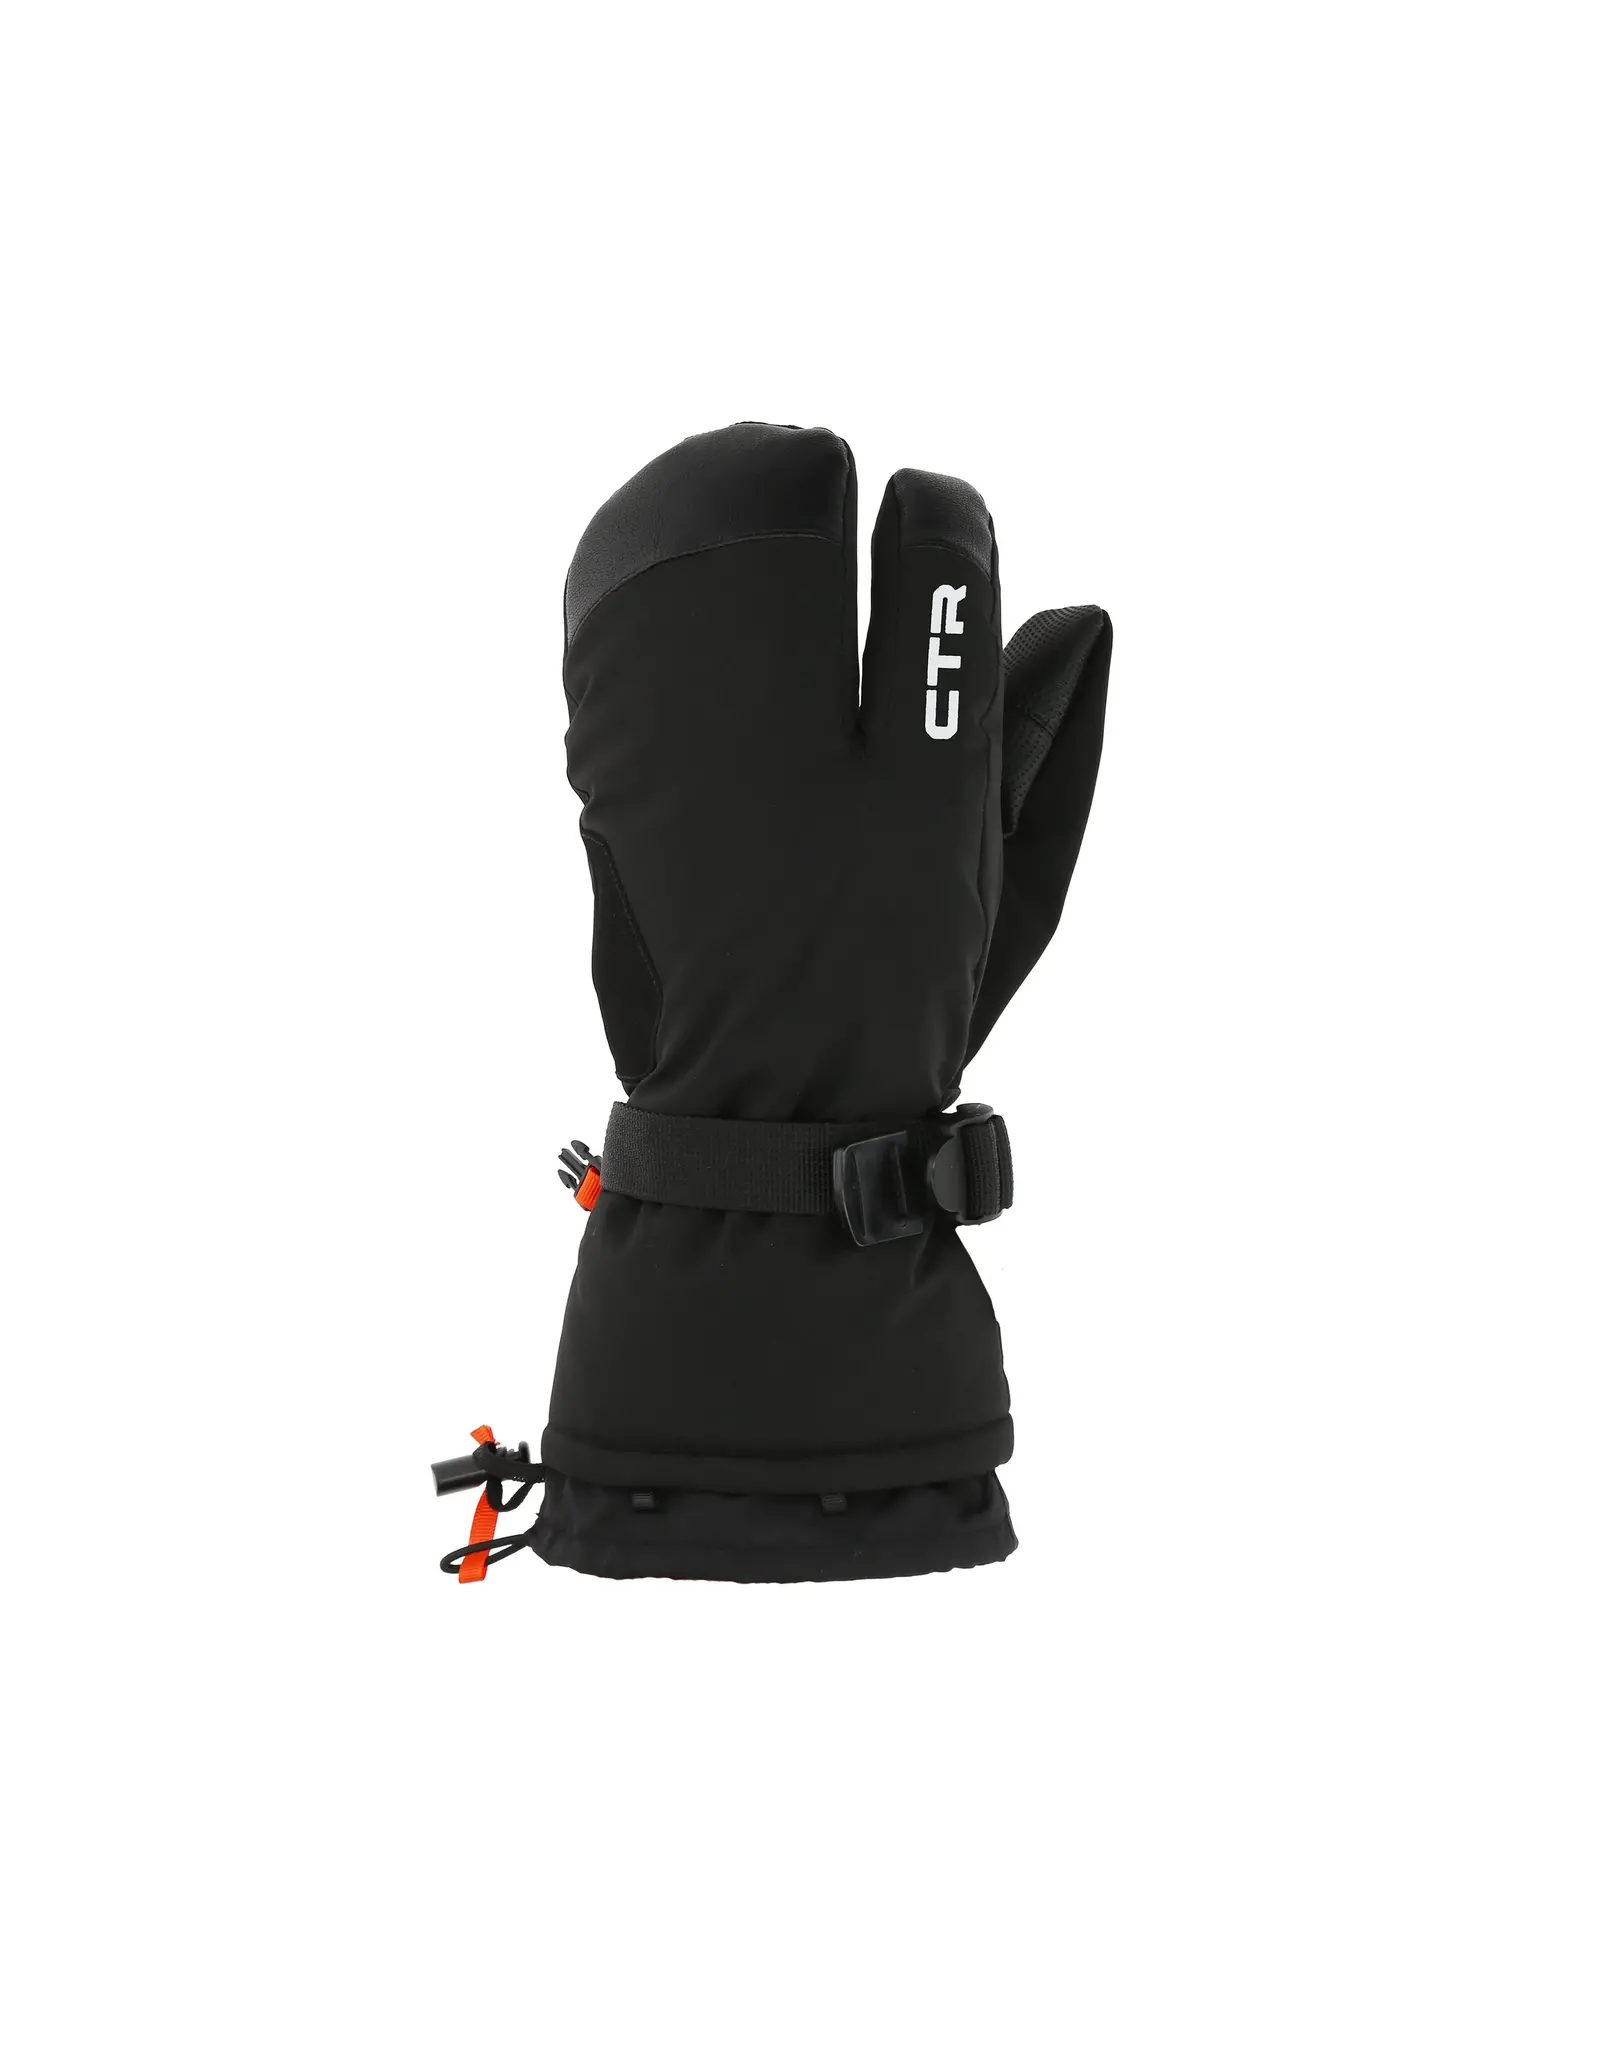 CTR SUPERIOR DOWN CLAMP GLOVE